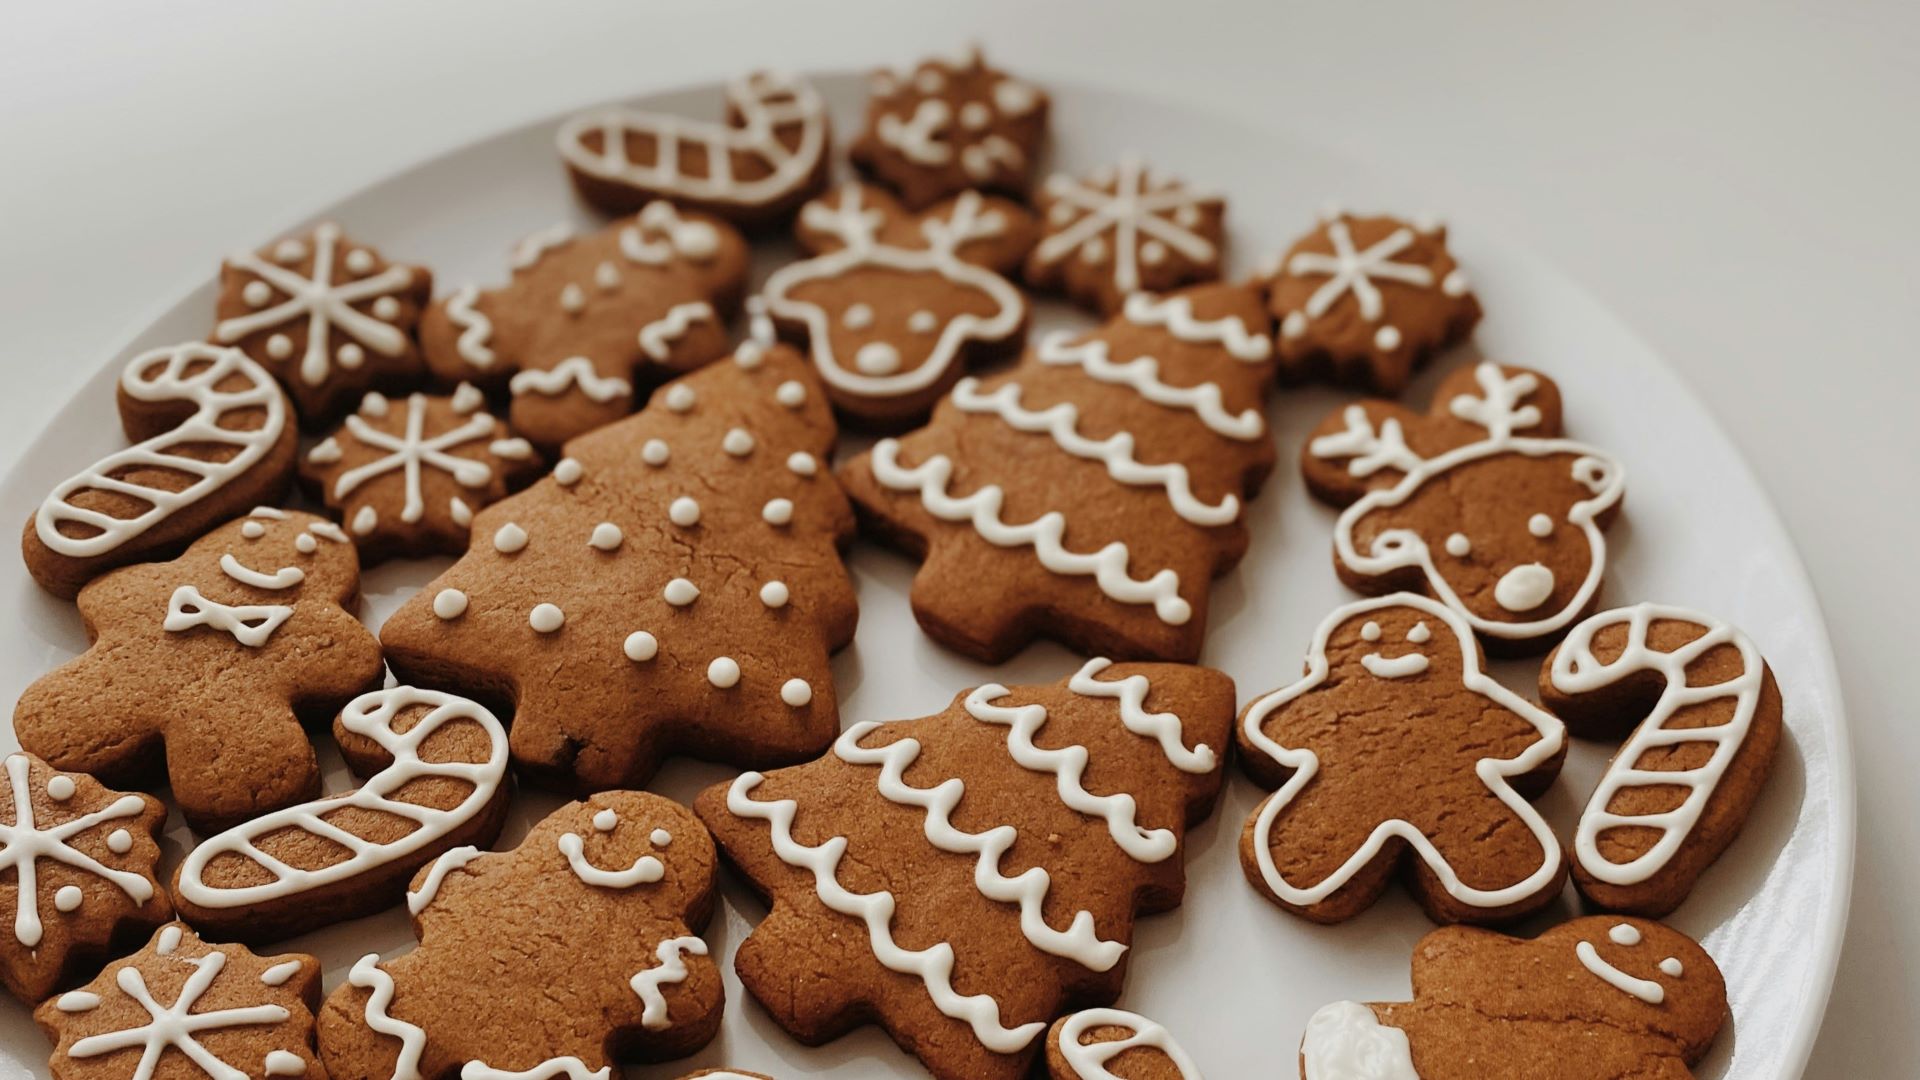 A picture of gingerbread in the shape of men, trees and candy canes.